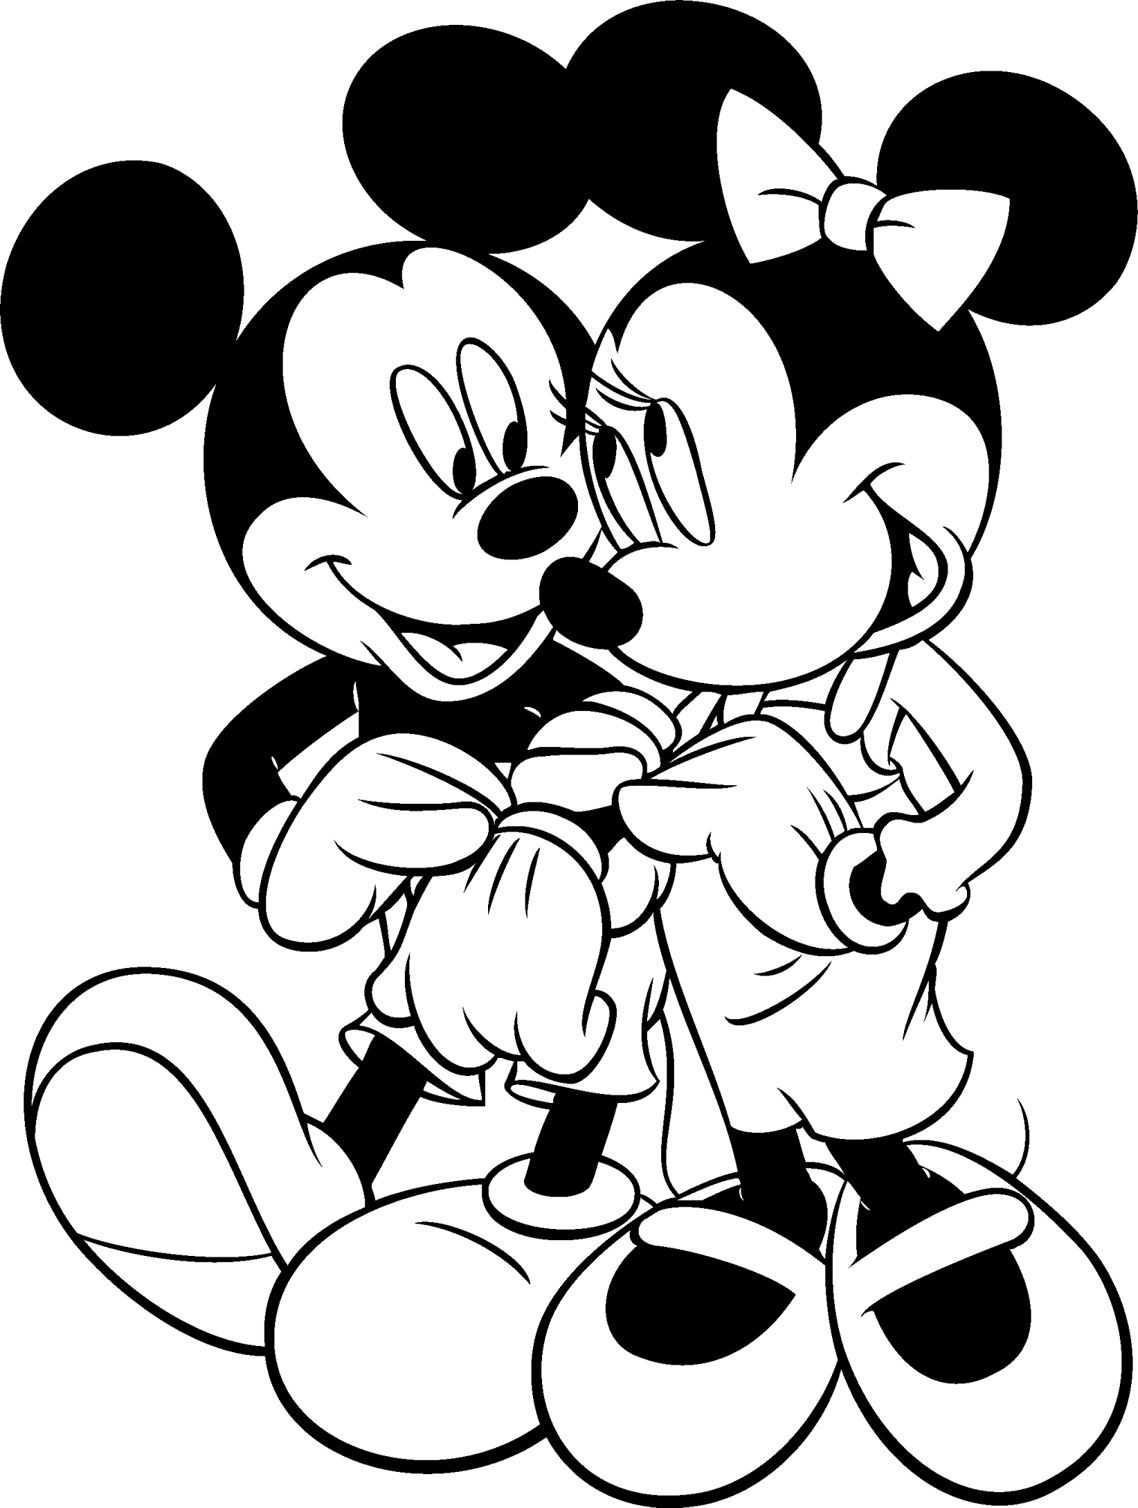 Mickey And Minnie Mouse Kissing Coloring Pages At Getcolorings